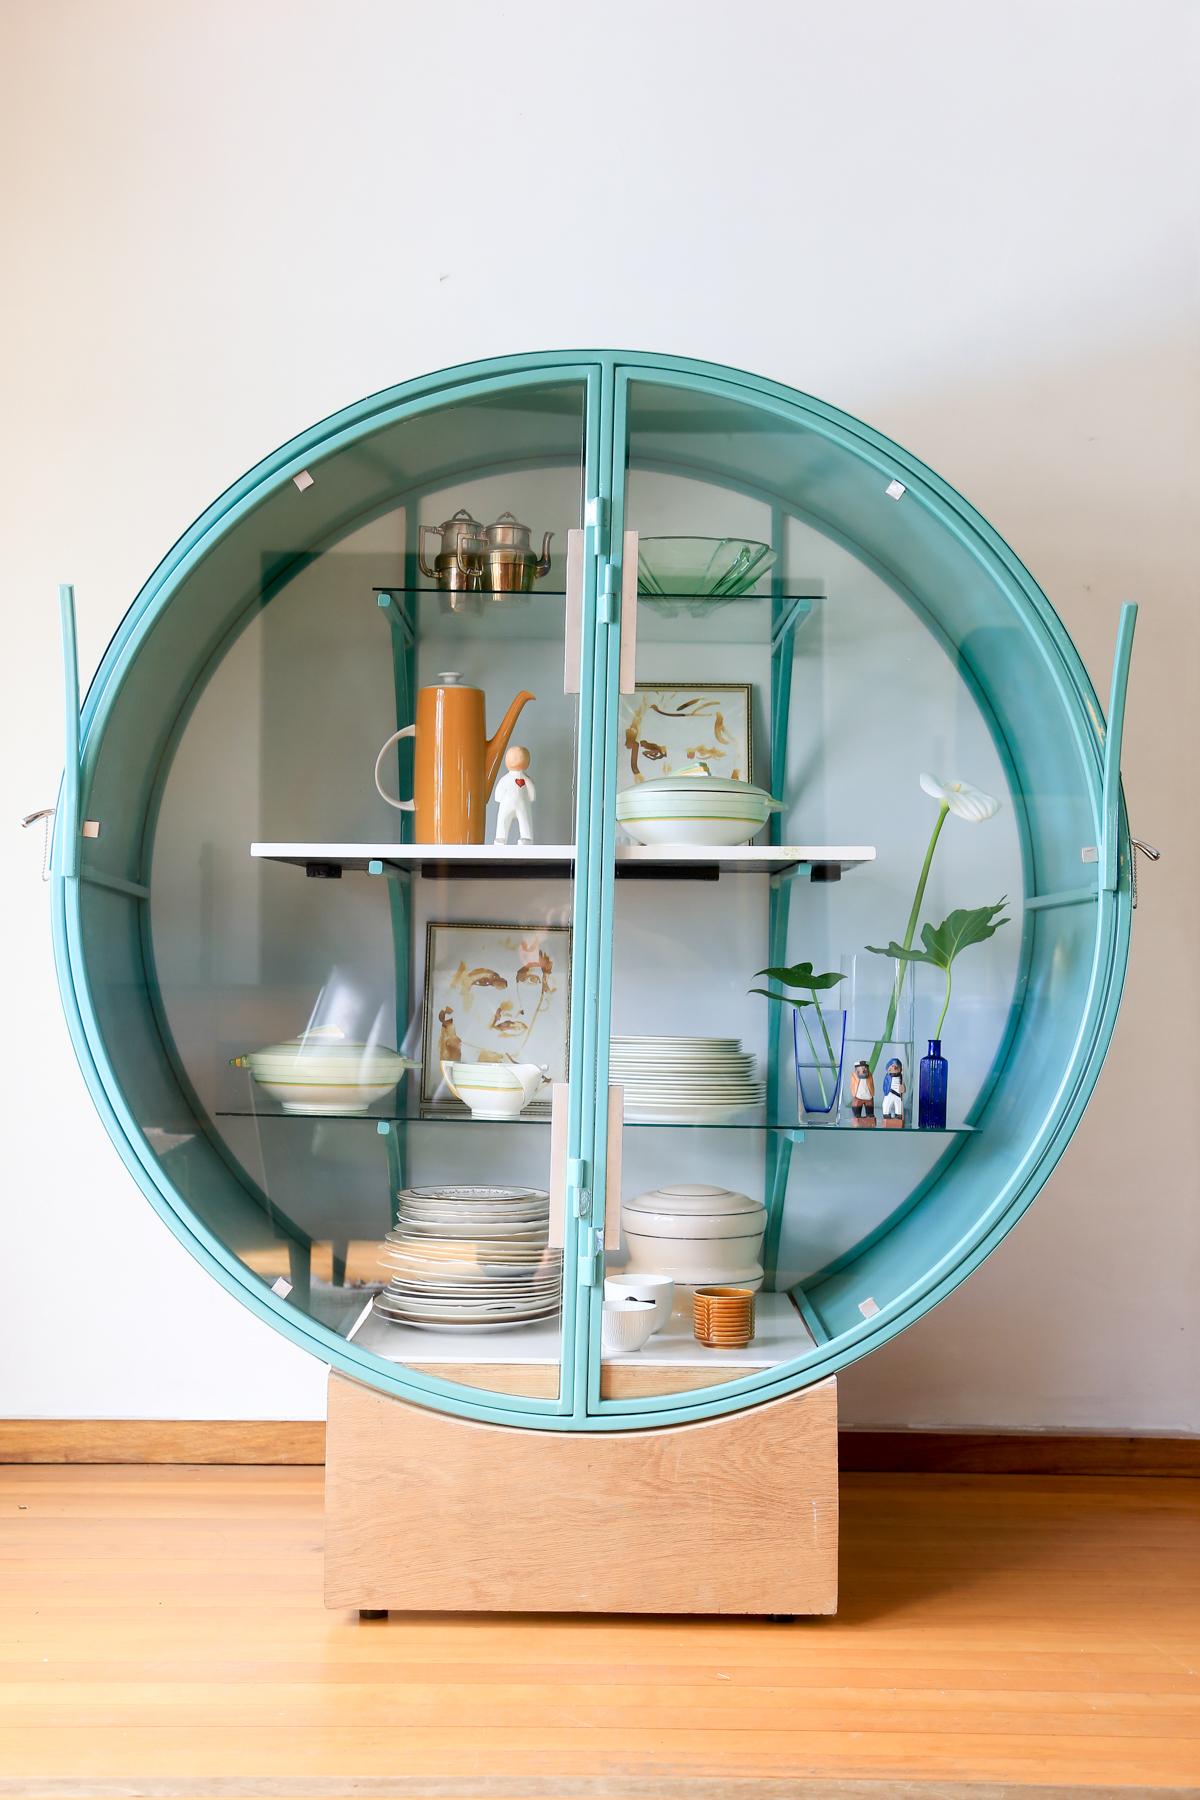 This is the Audacious South African Showcase, a round display cabinet designed and hand made by Glen Napier. It is a bold contemporary take on art deco. It is made of steel, safety glass, and a raised wooden base that creates a floating effect. It